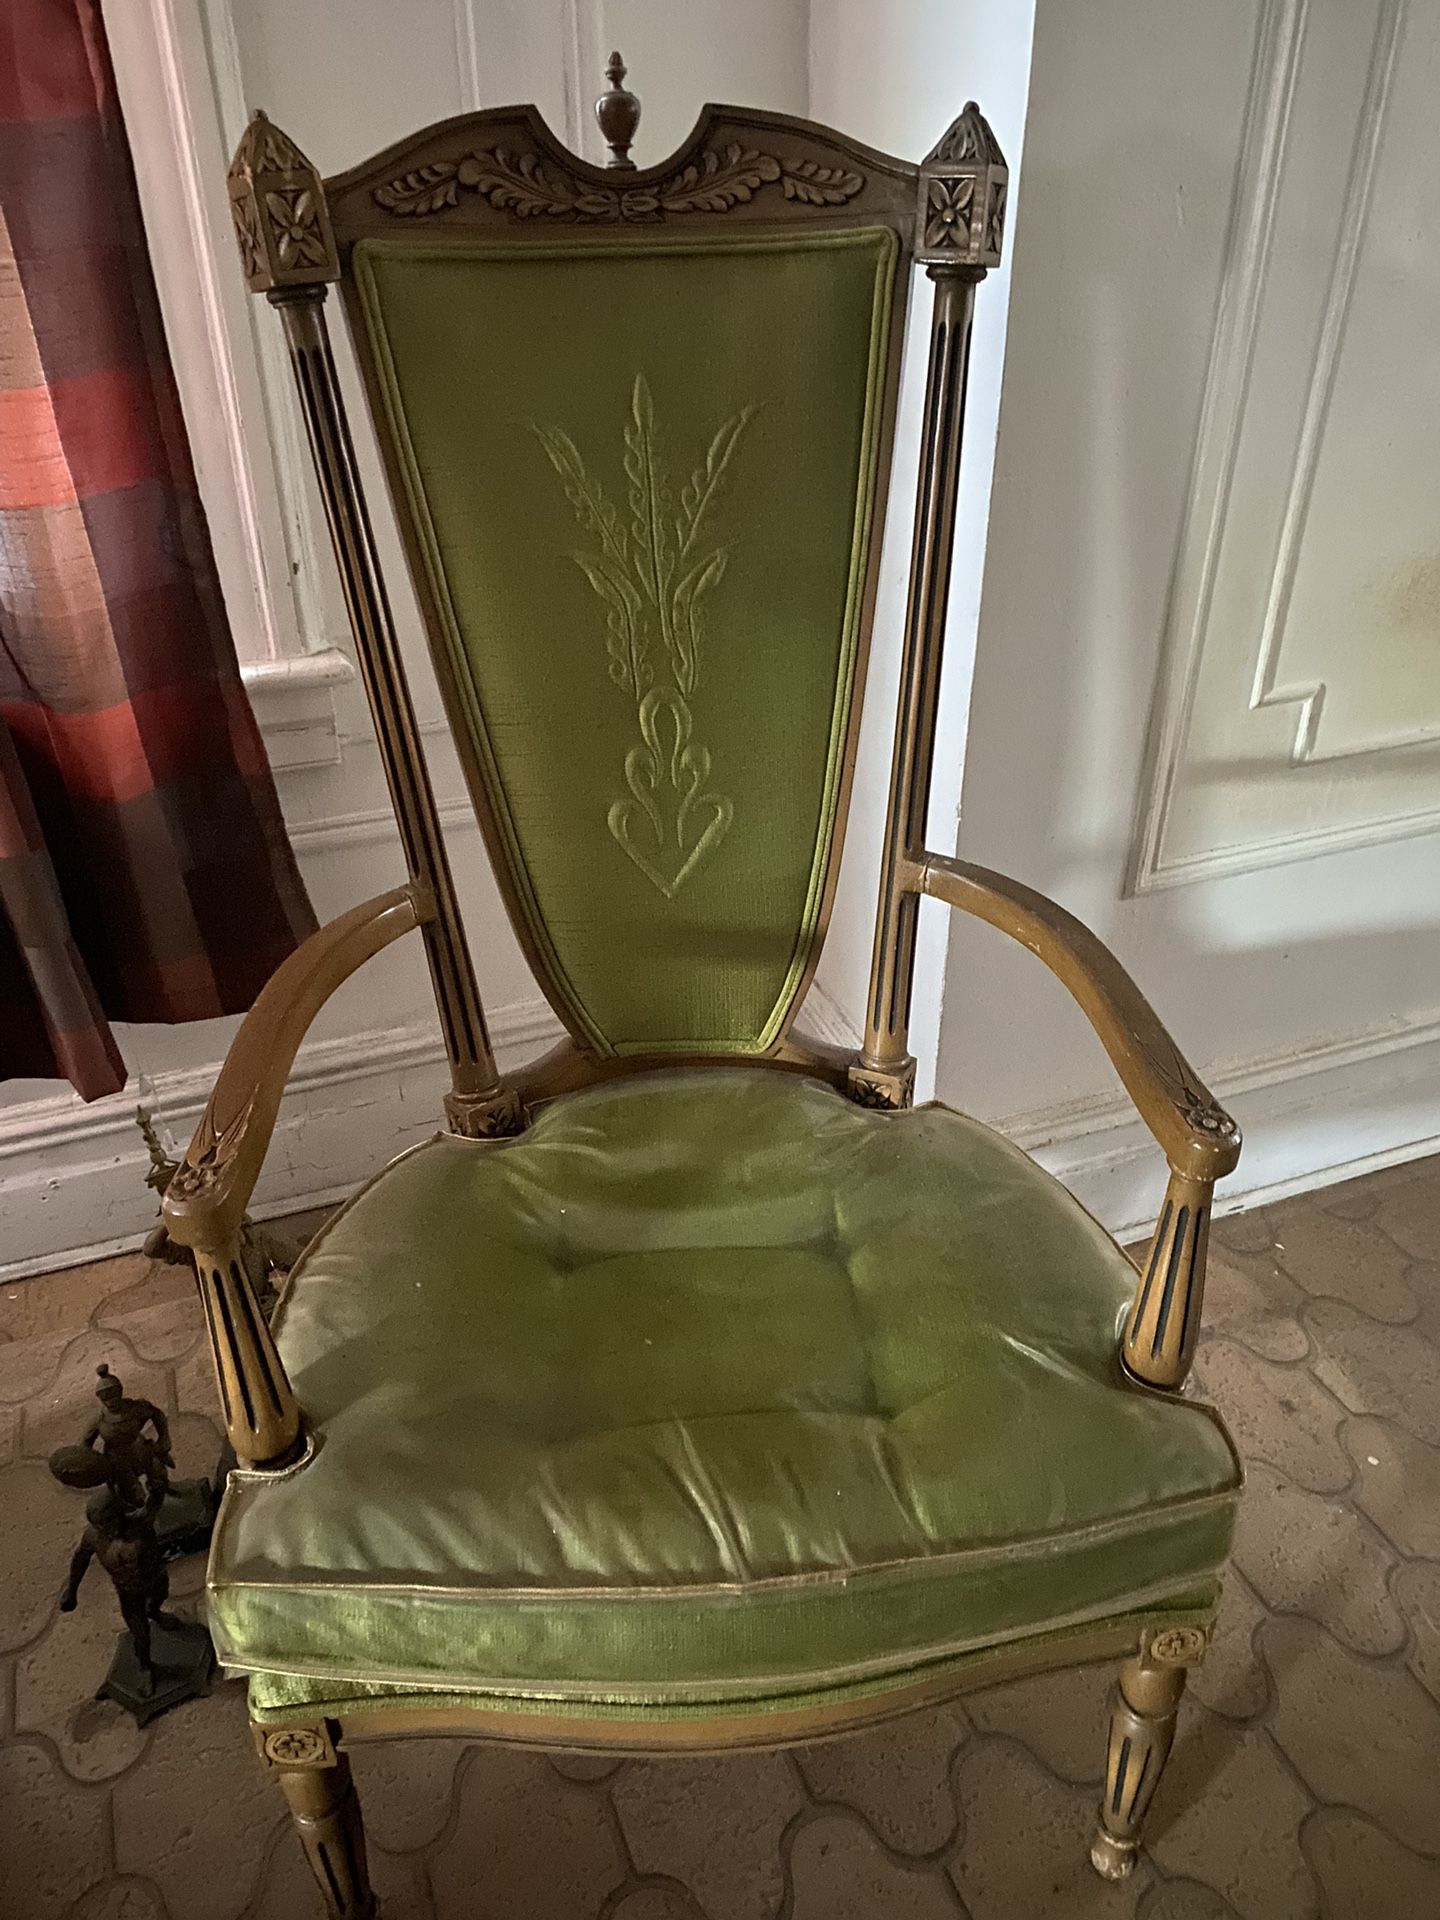 Vintage Green High Back Plastic Coated Wood Chair